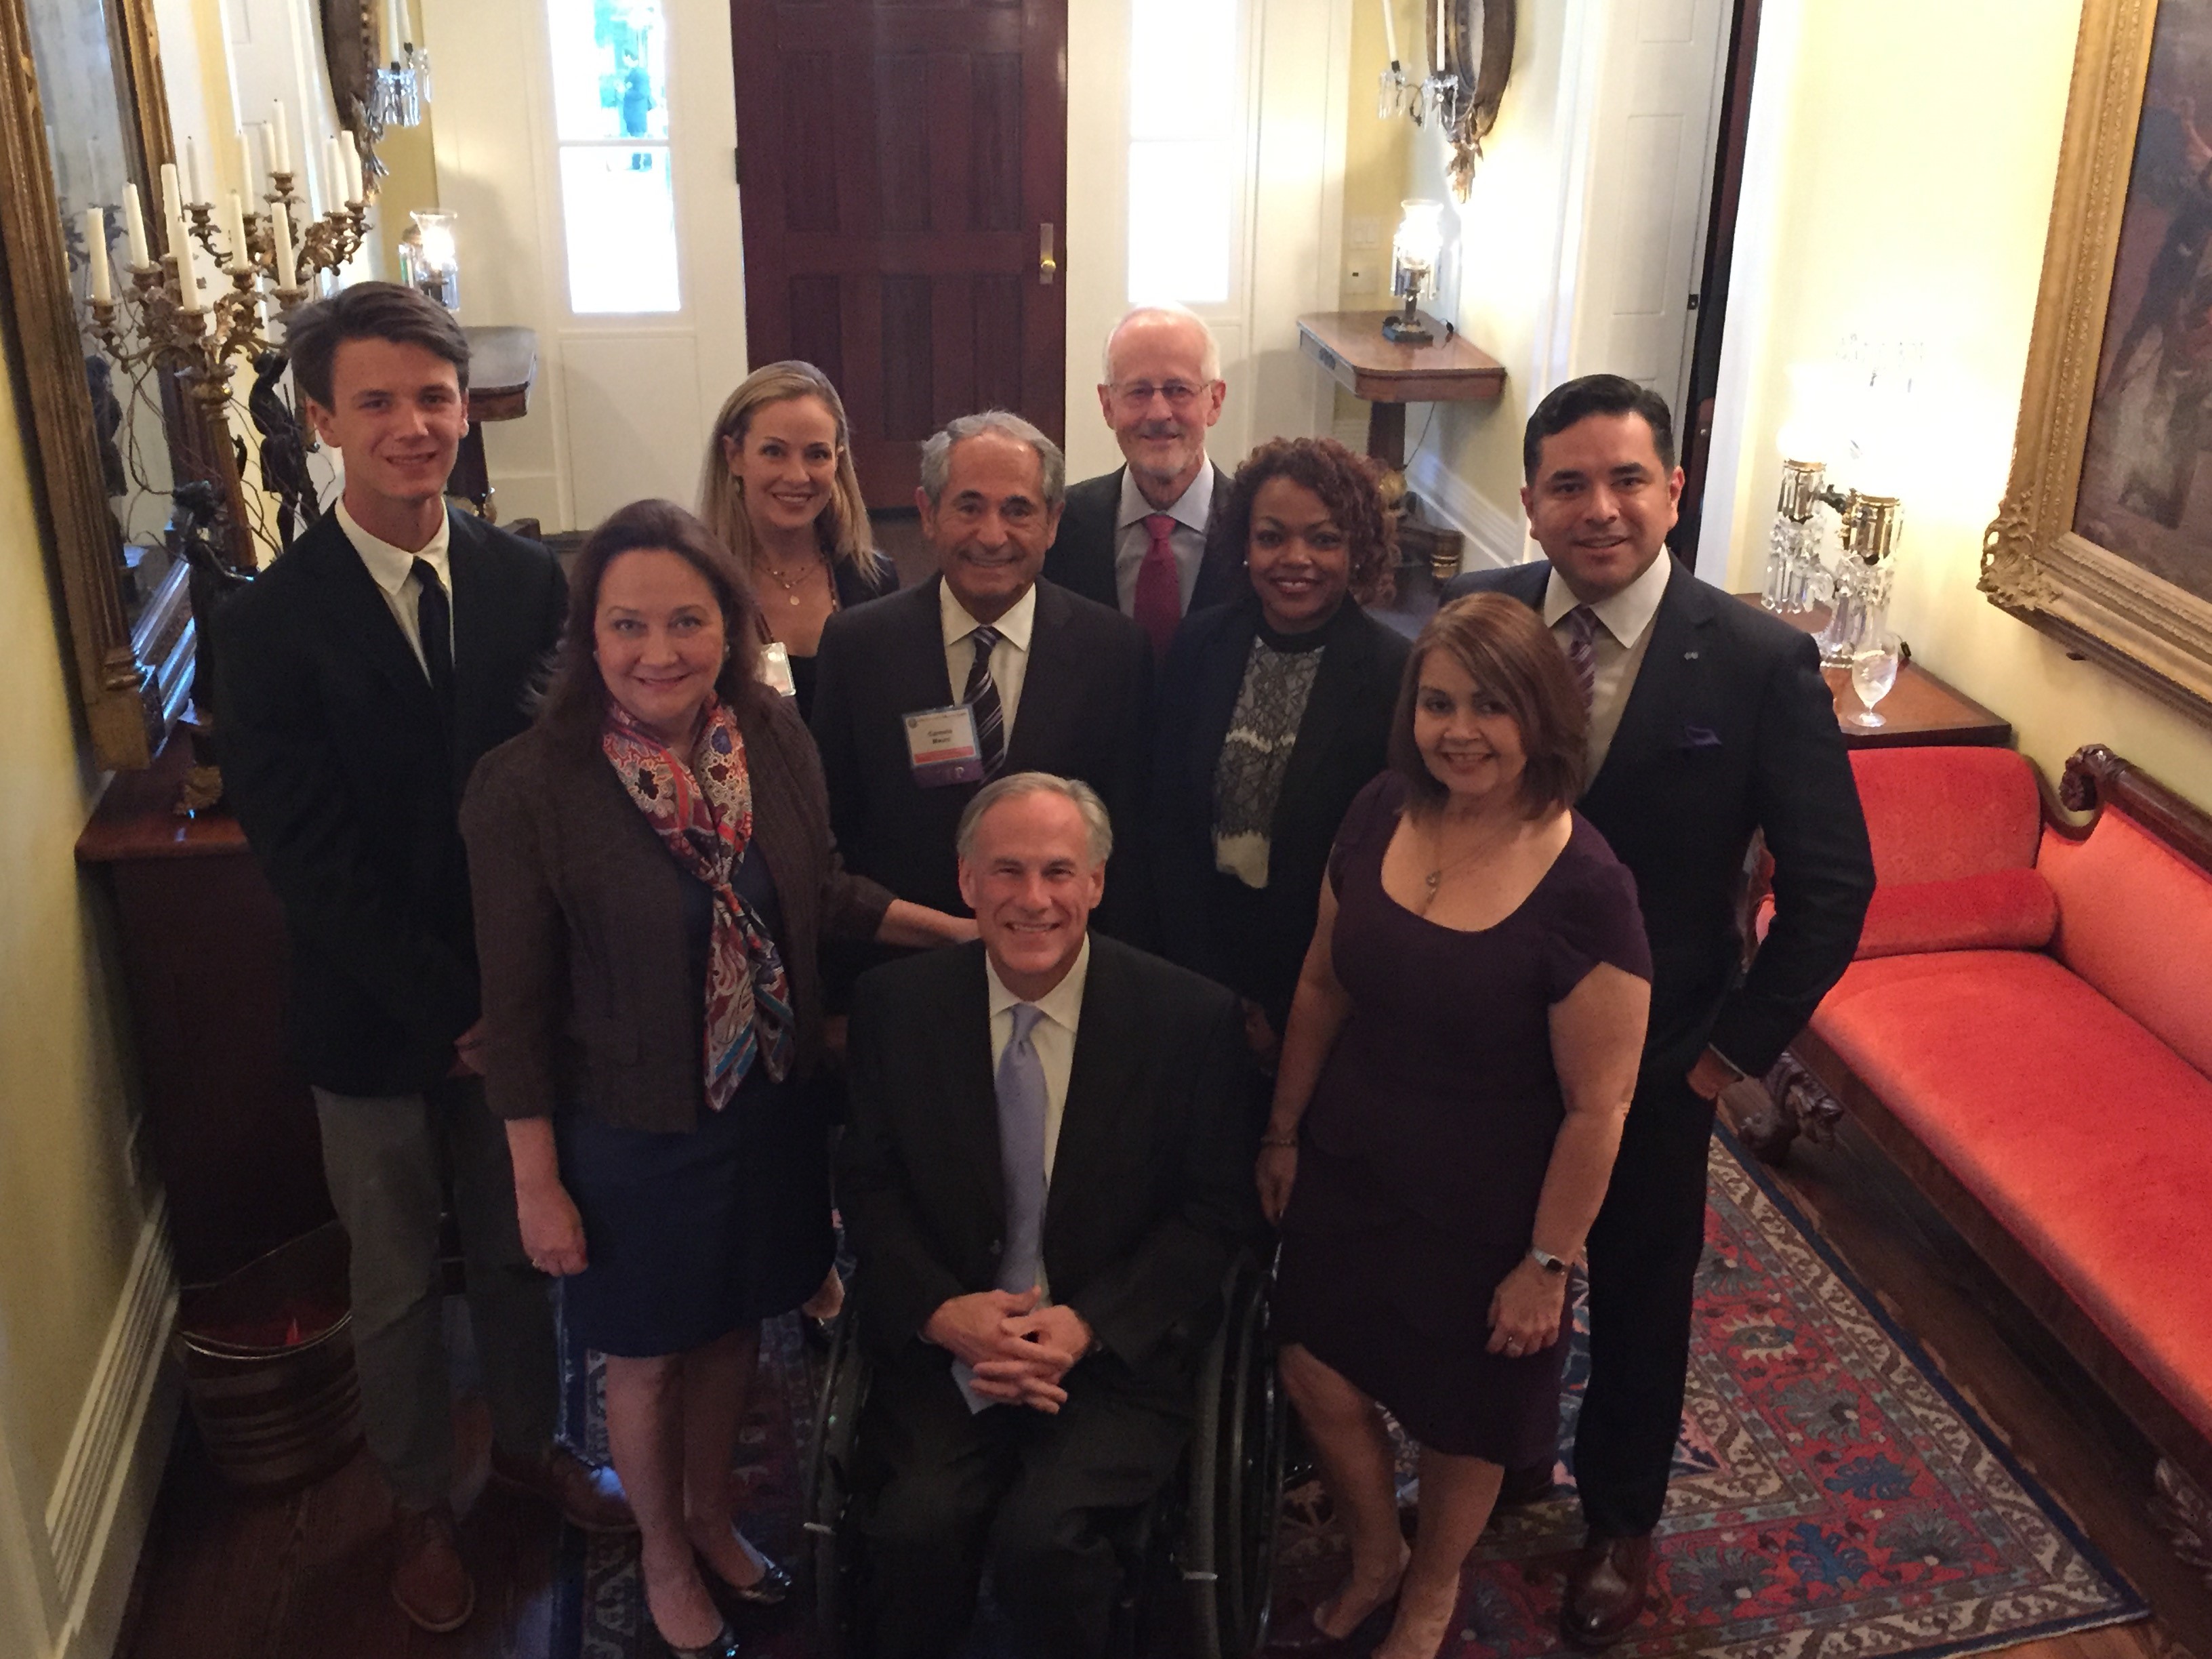 2016 Governor’s Volunteer Awards Winners with Governor Abbott and First Lady Cecilia